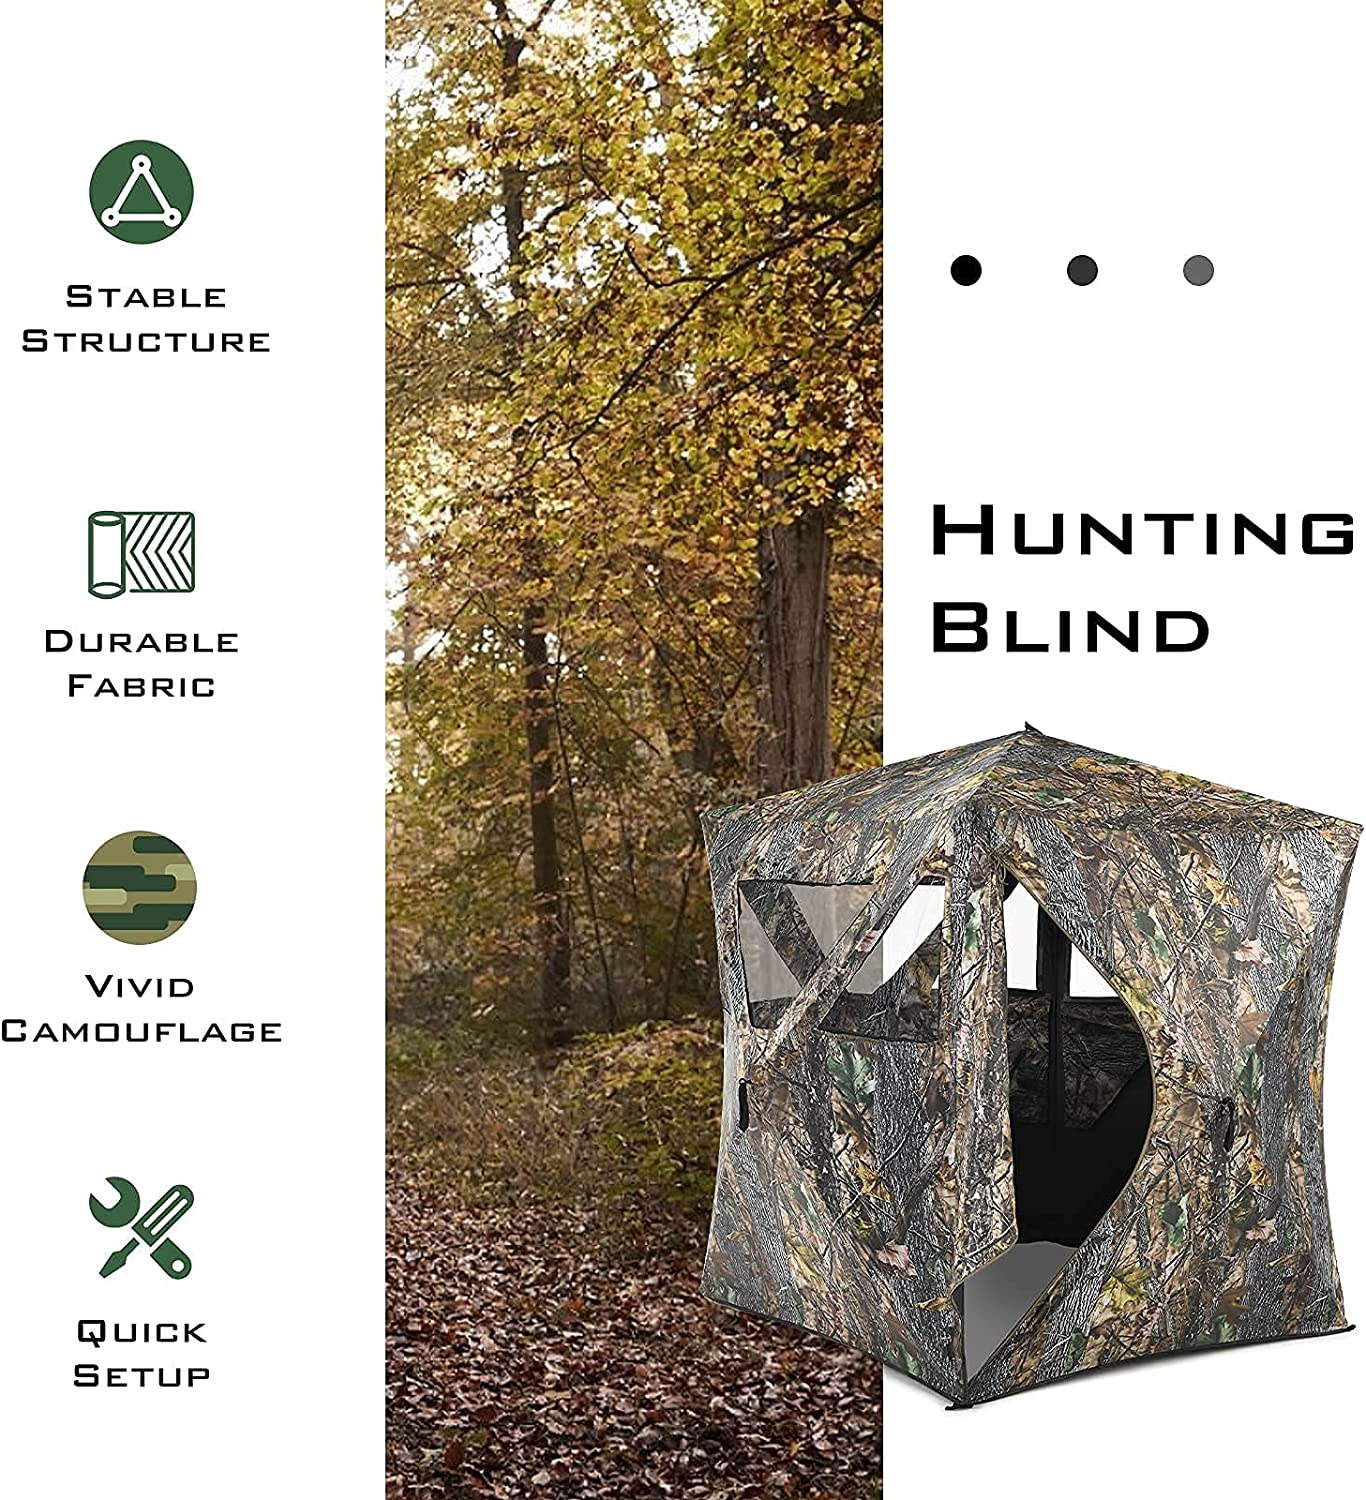 Chairliving 3 Person Pop up Ground Camo Deer Blind Portable Camouflage Hunting Blind Tent with 360 Degree Mesh Windows Carrying Bag